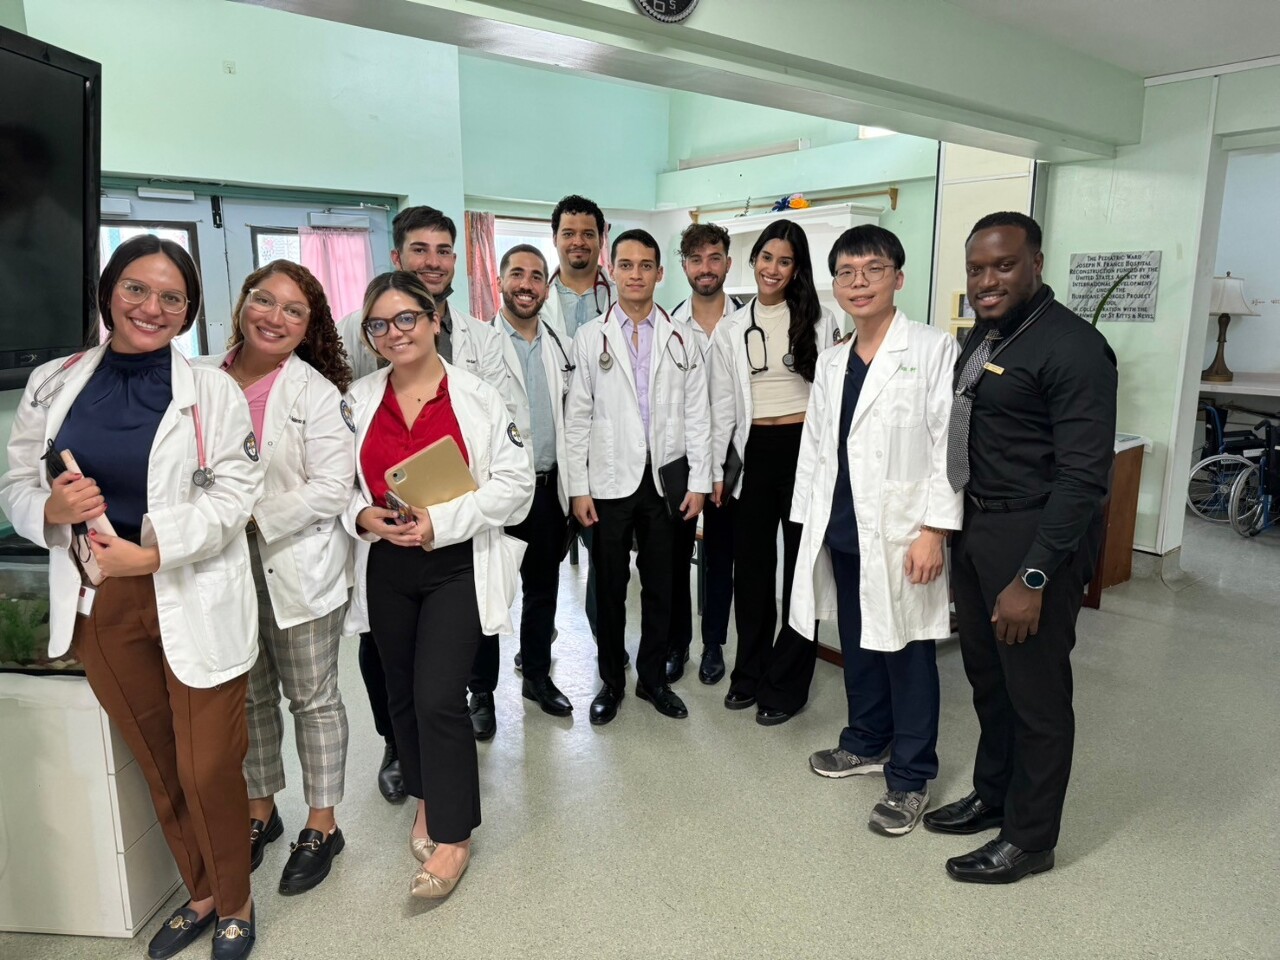 Taiwan’s hospital completes medical assistance to Saint Kitts and Nevis